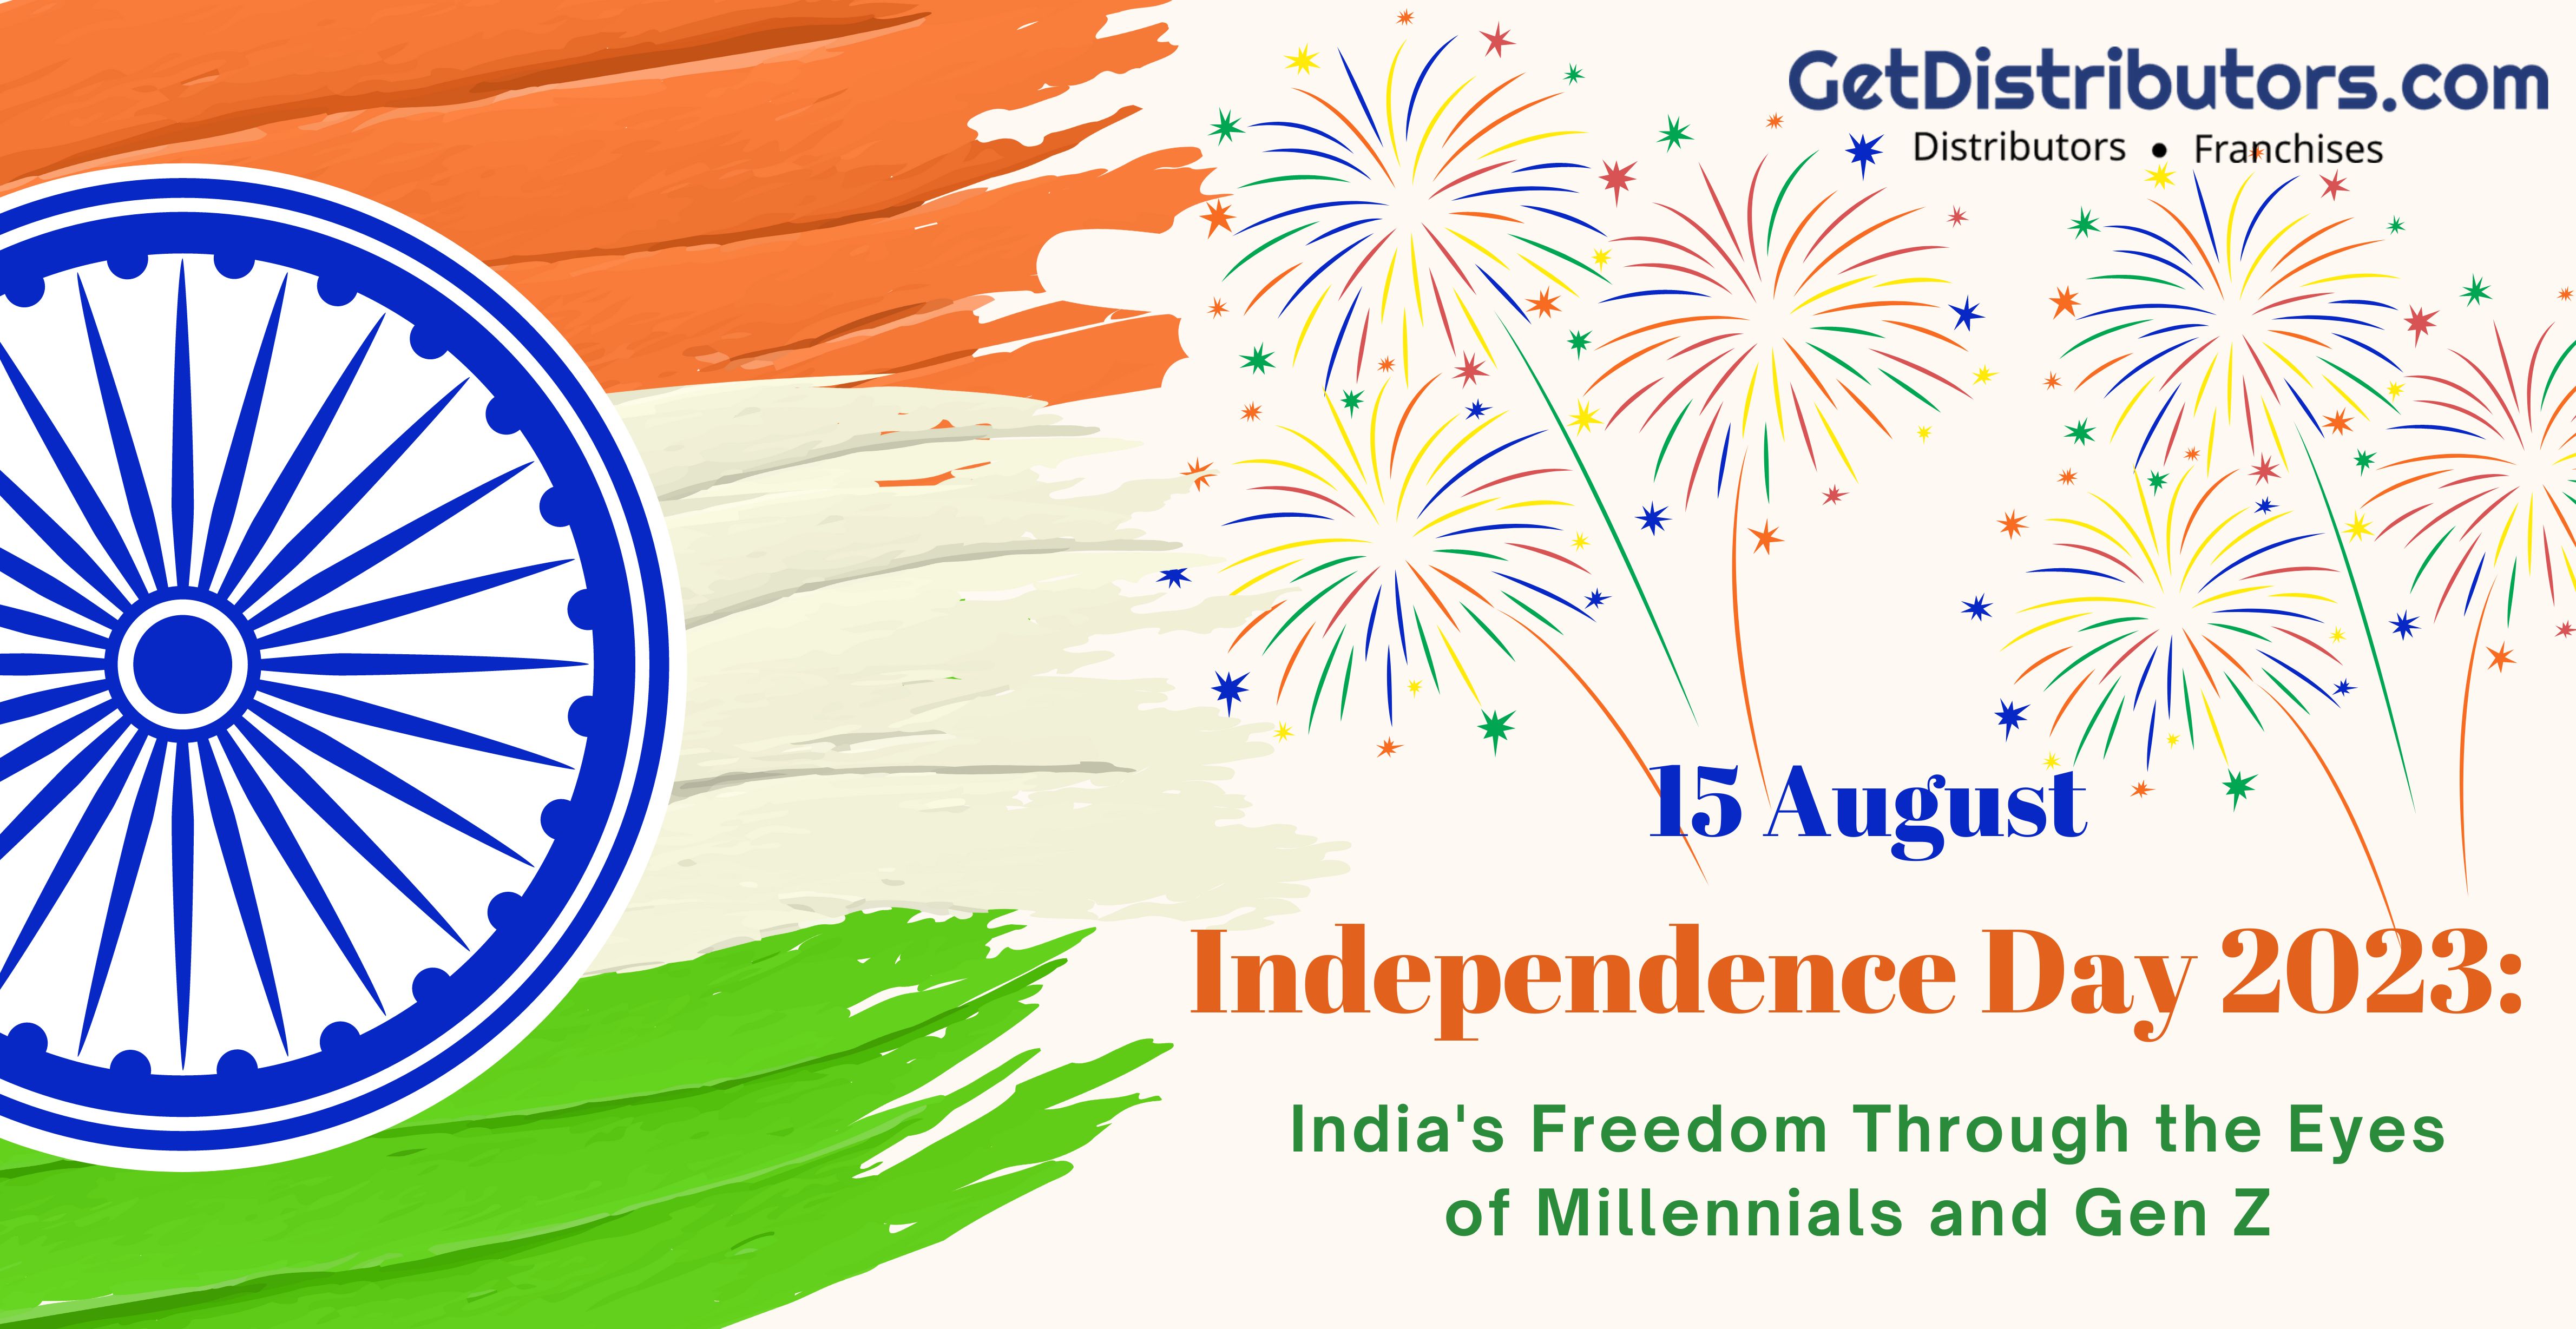 Independence Day 2023: India’s Freedom Through the Eyes of Millennials and Gen Z